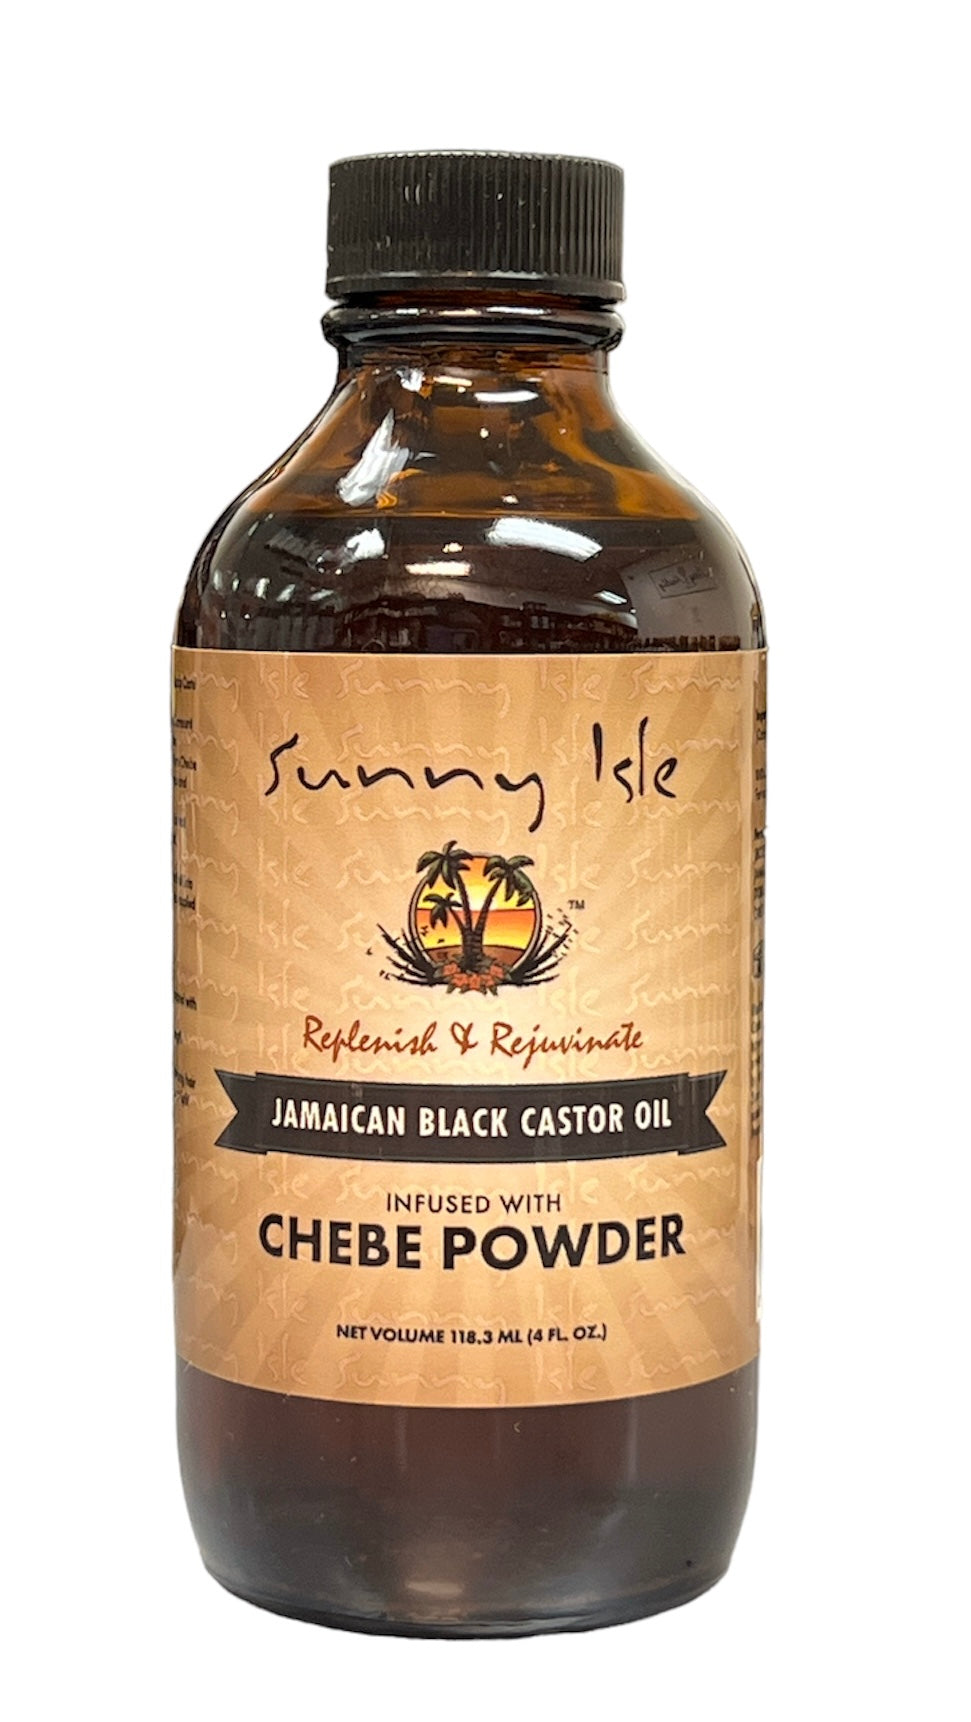 Jamaican Black Castor Oil Infused with/ Chebe Powder